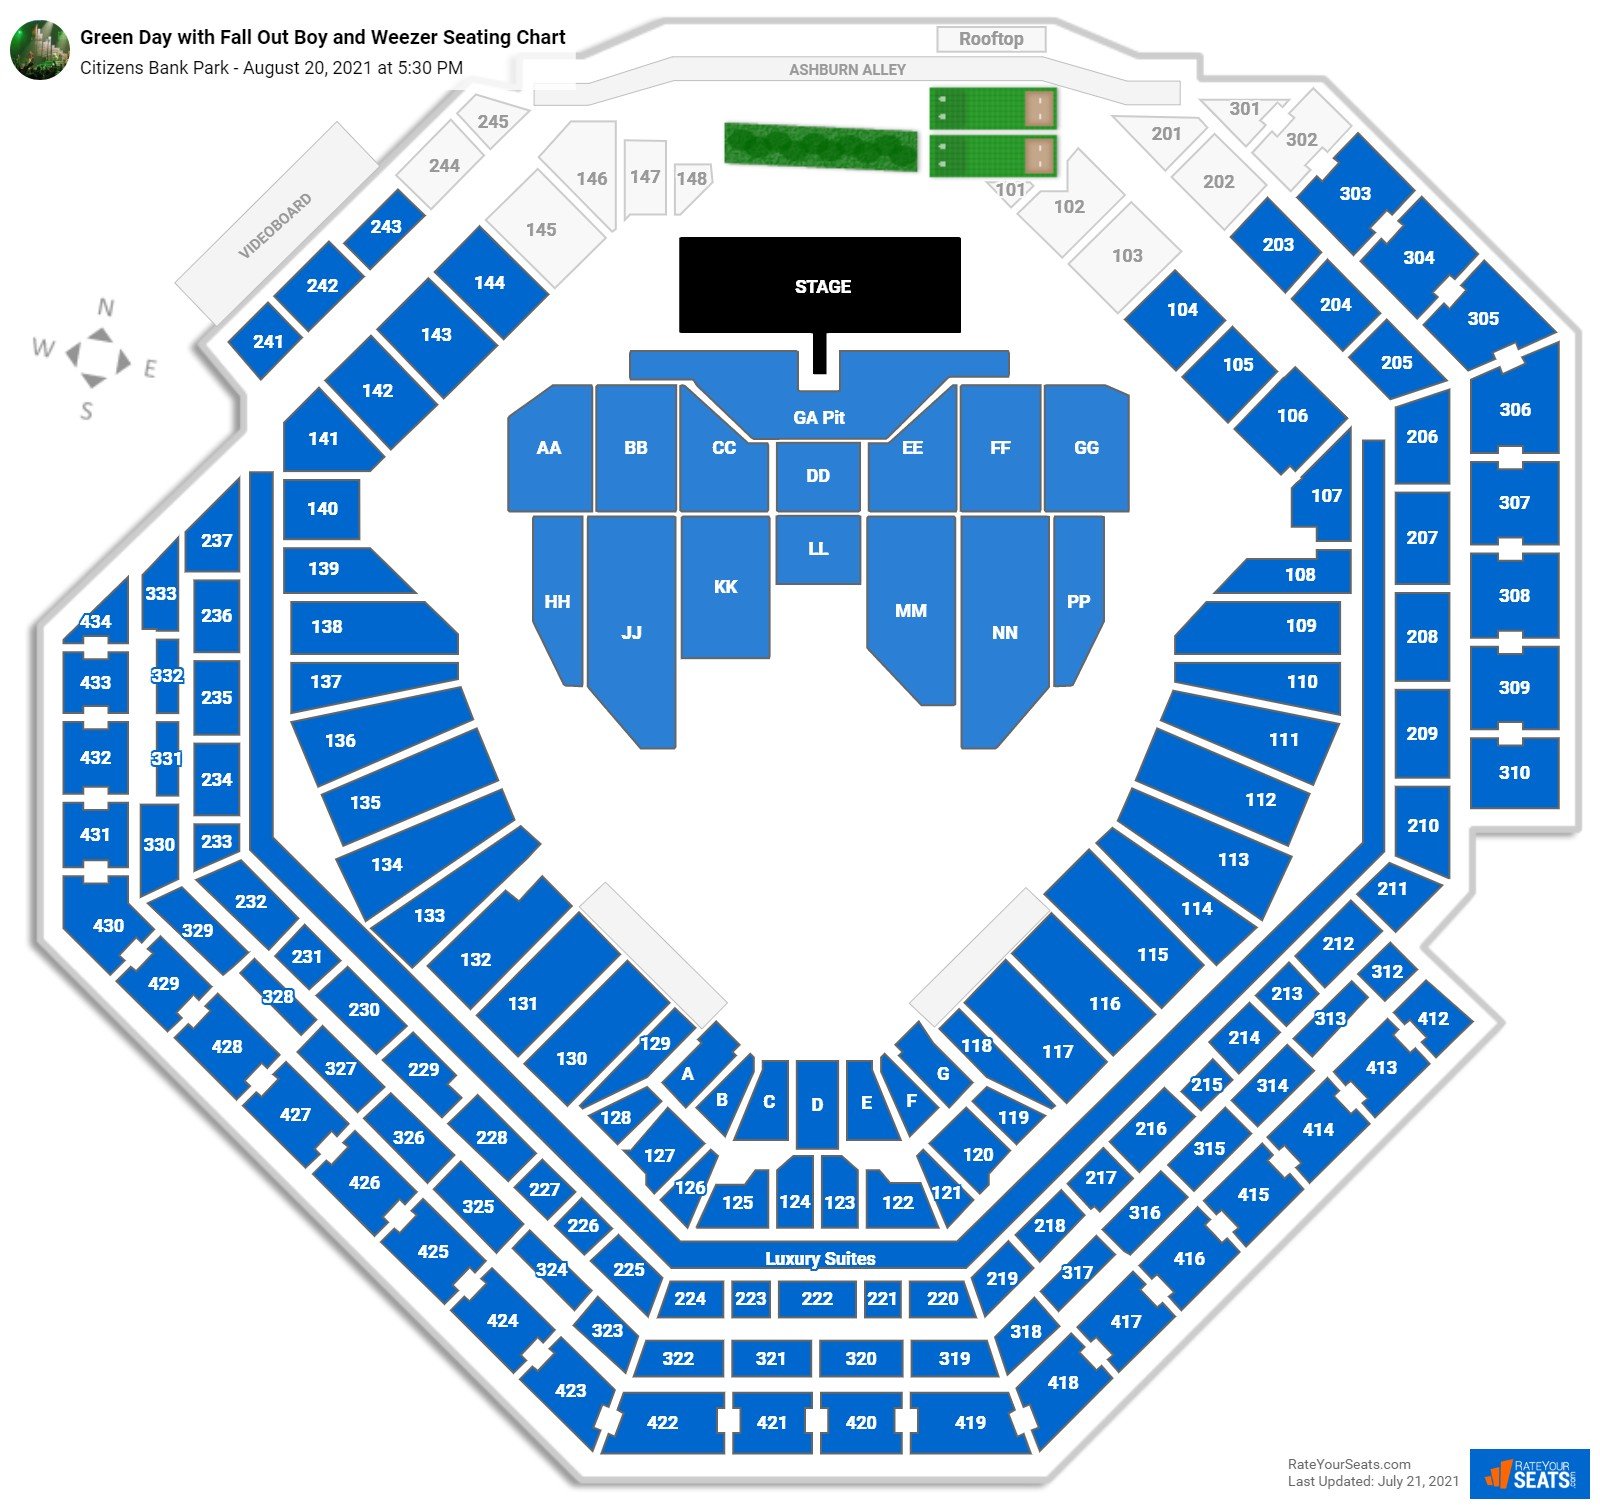 Citizens Bank Park Seating Charts for Concerts